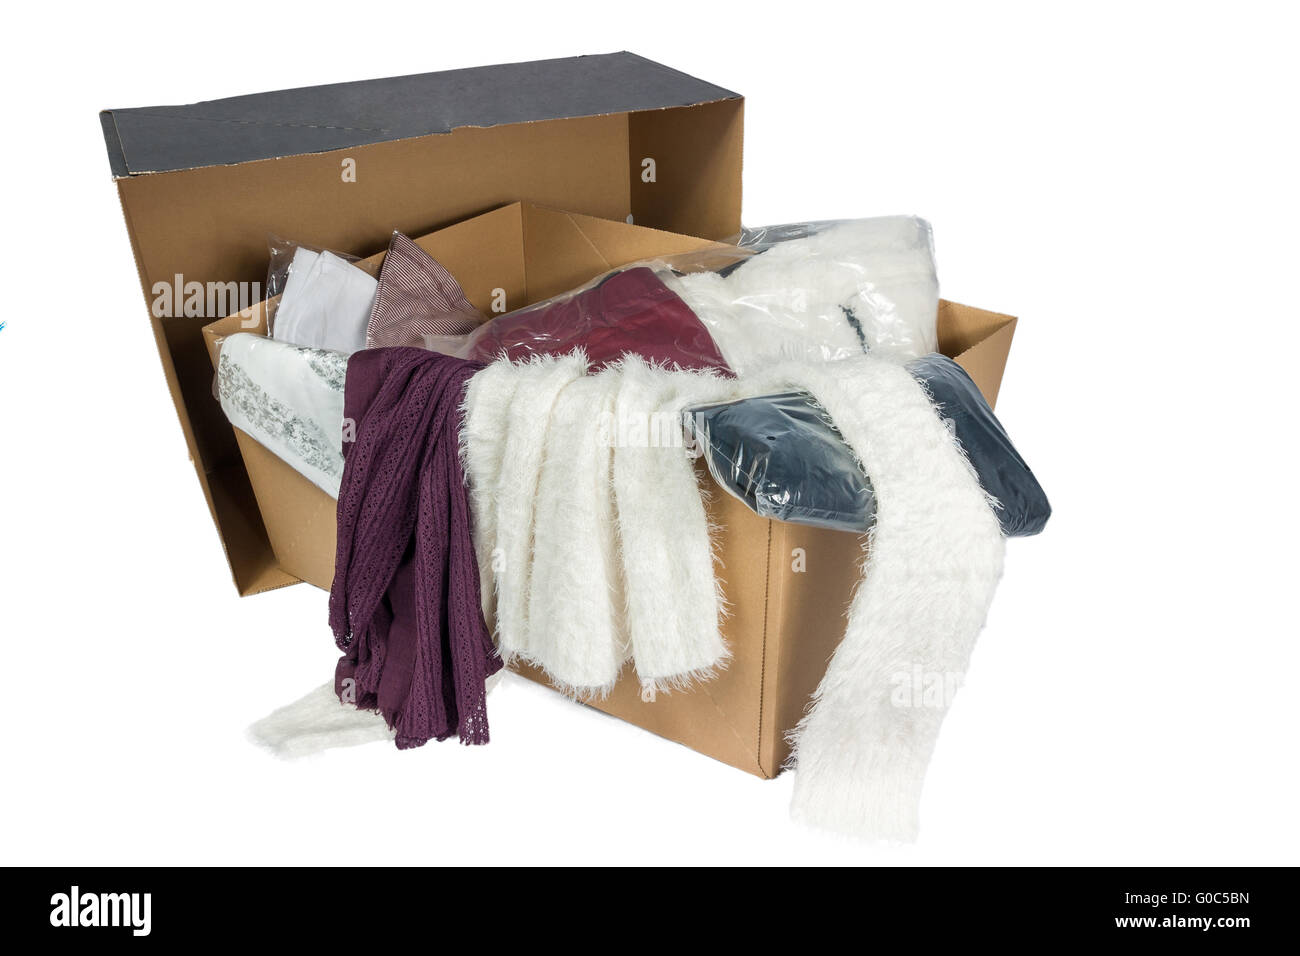 Cardboard with various packed and unpacked clothes Stock Photo